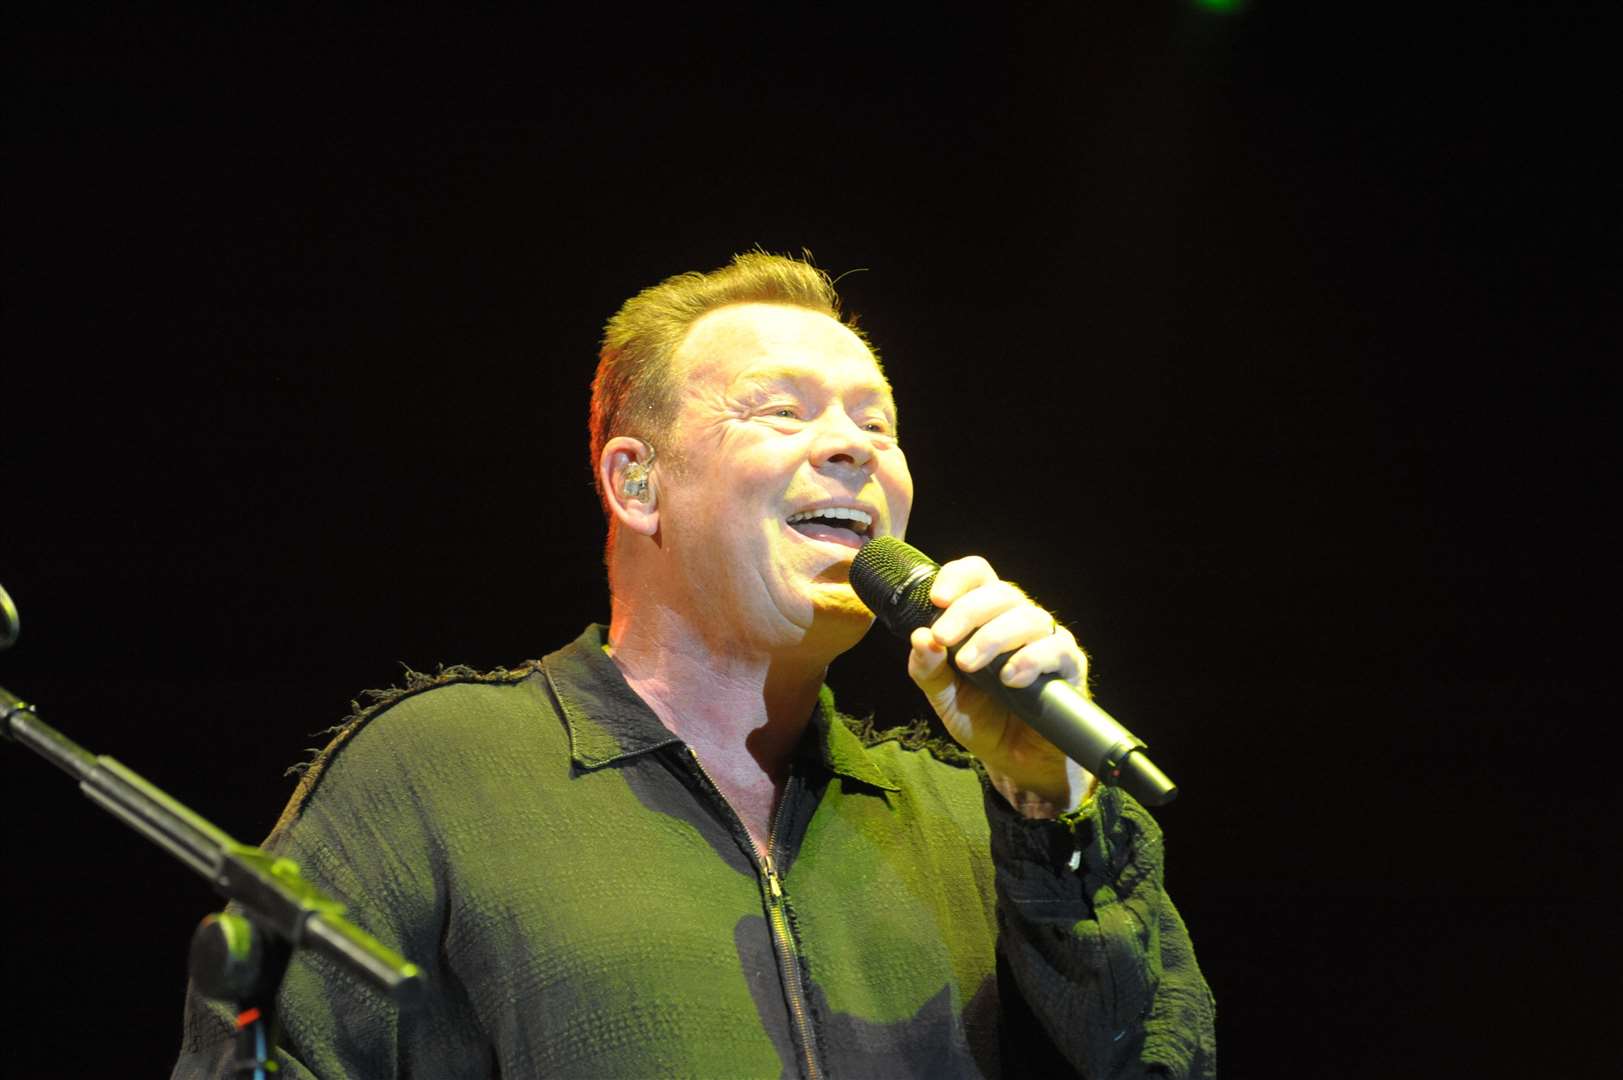 UB40 featuring Ali Campbell kick off the Park Live Kent summer series Picture: Steve Crispe